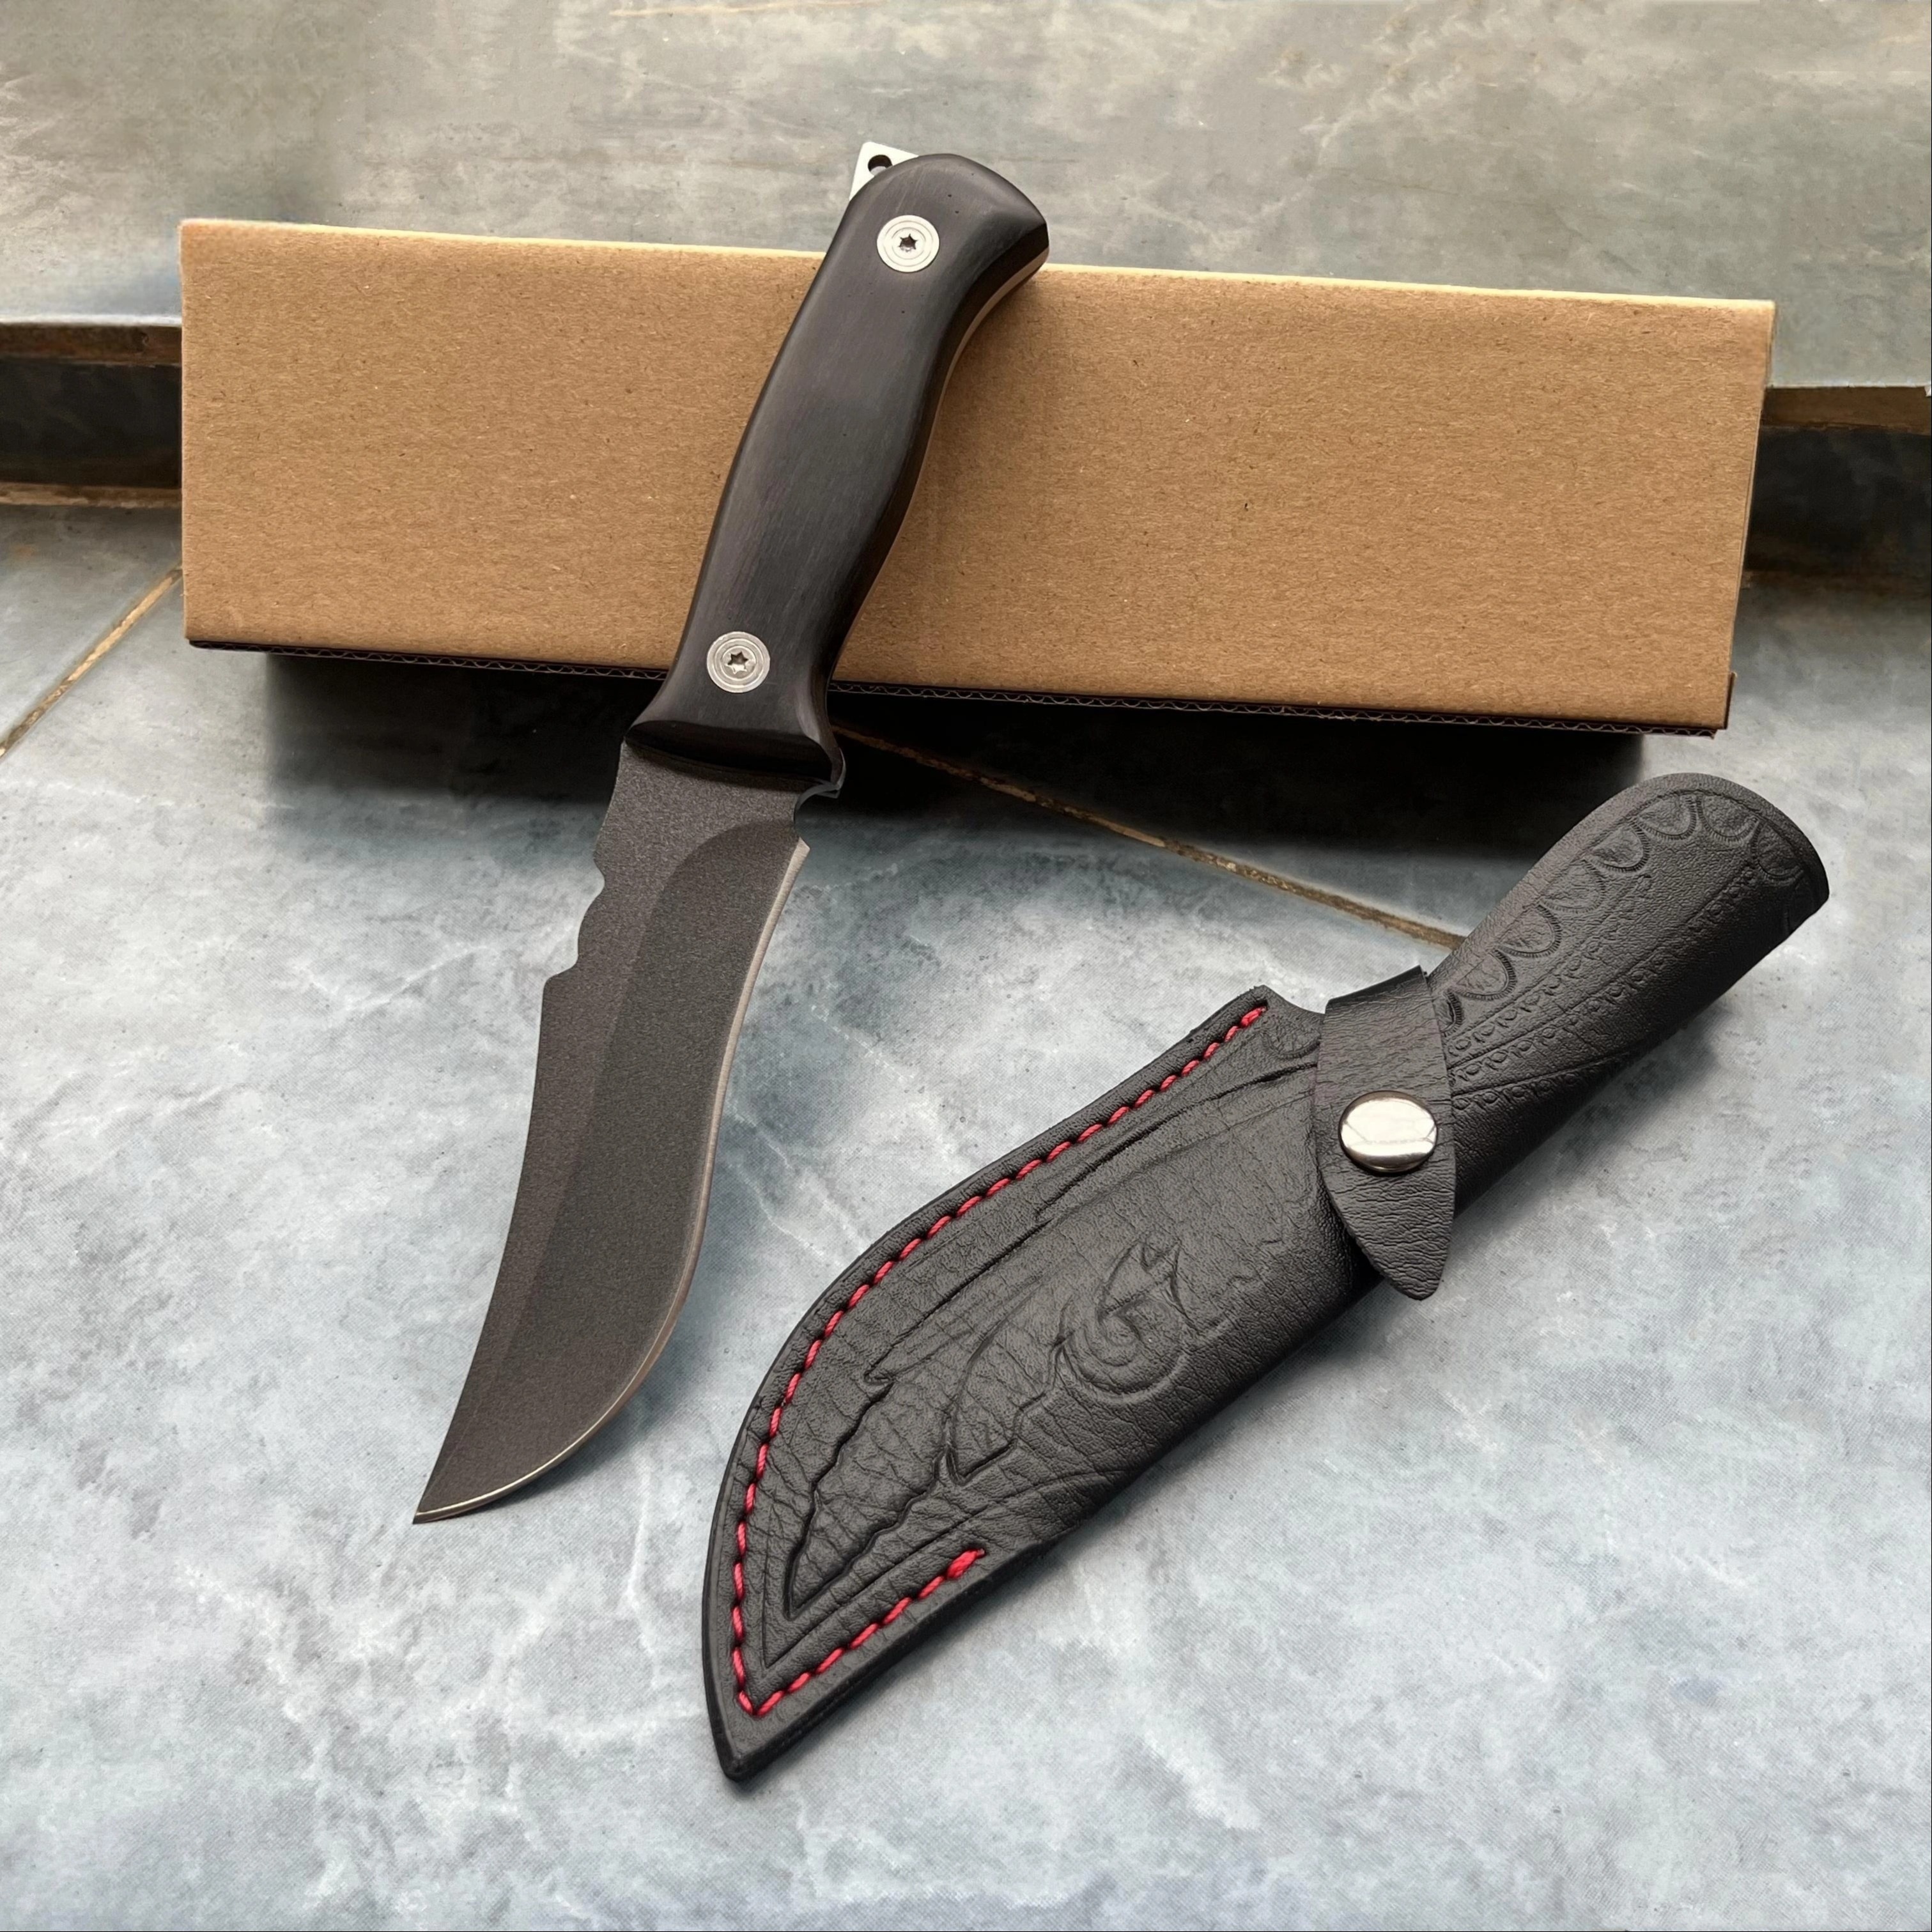 New High Quality Outdoor Survival Tactical Folding Knife Self Defense Tool  EDC